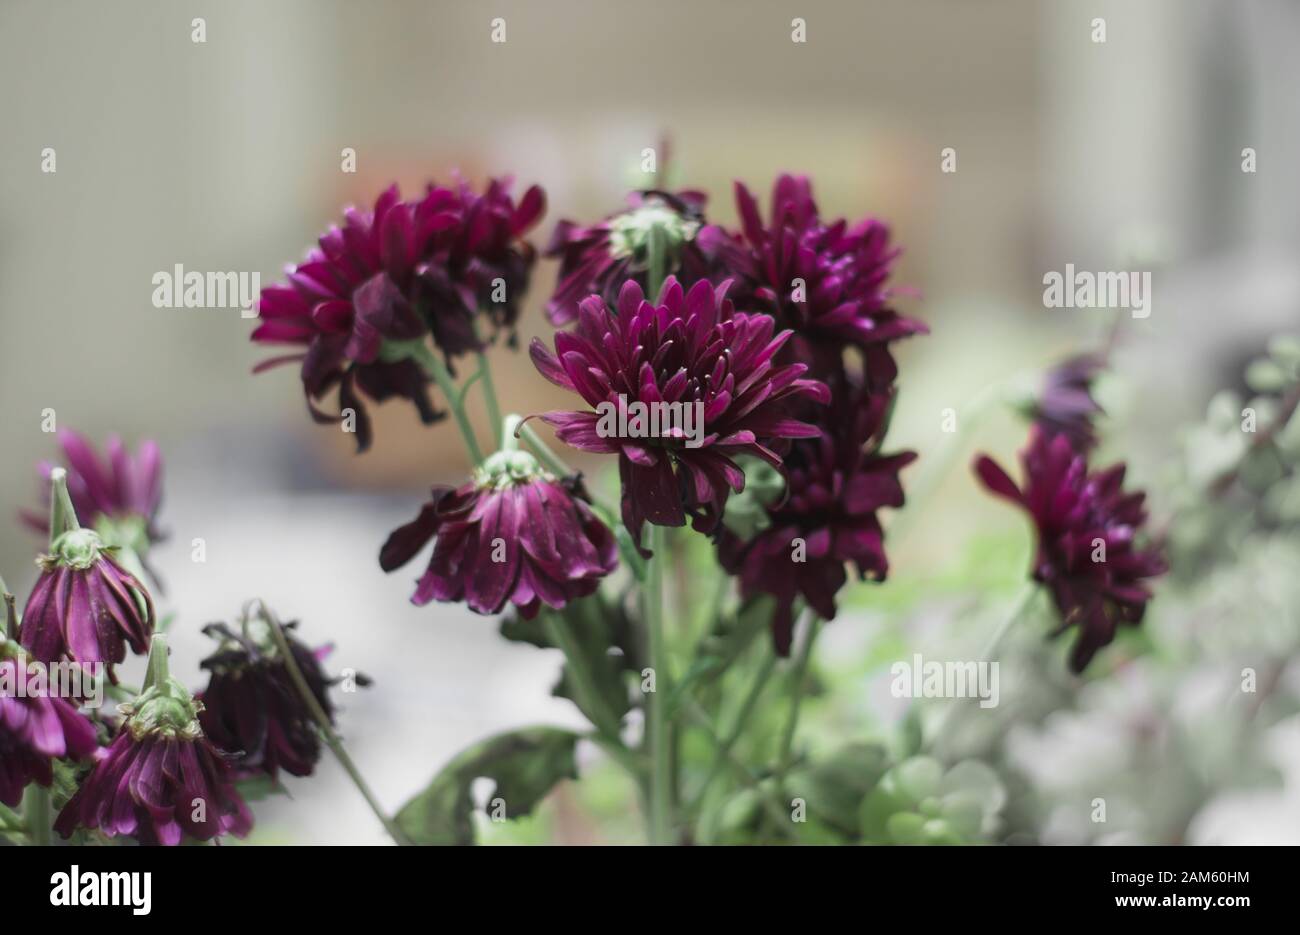 Purple flower on a white and gray background. Indoor flower pot. Home gardening. Stock Photo